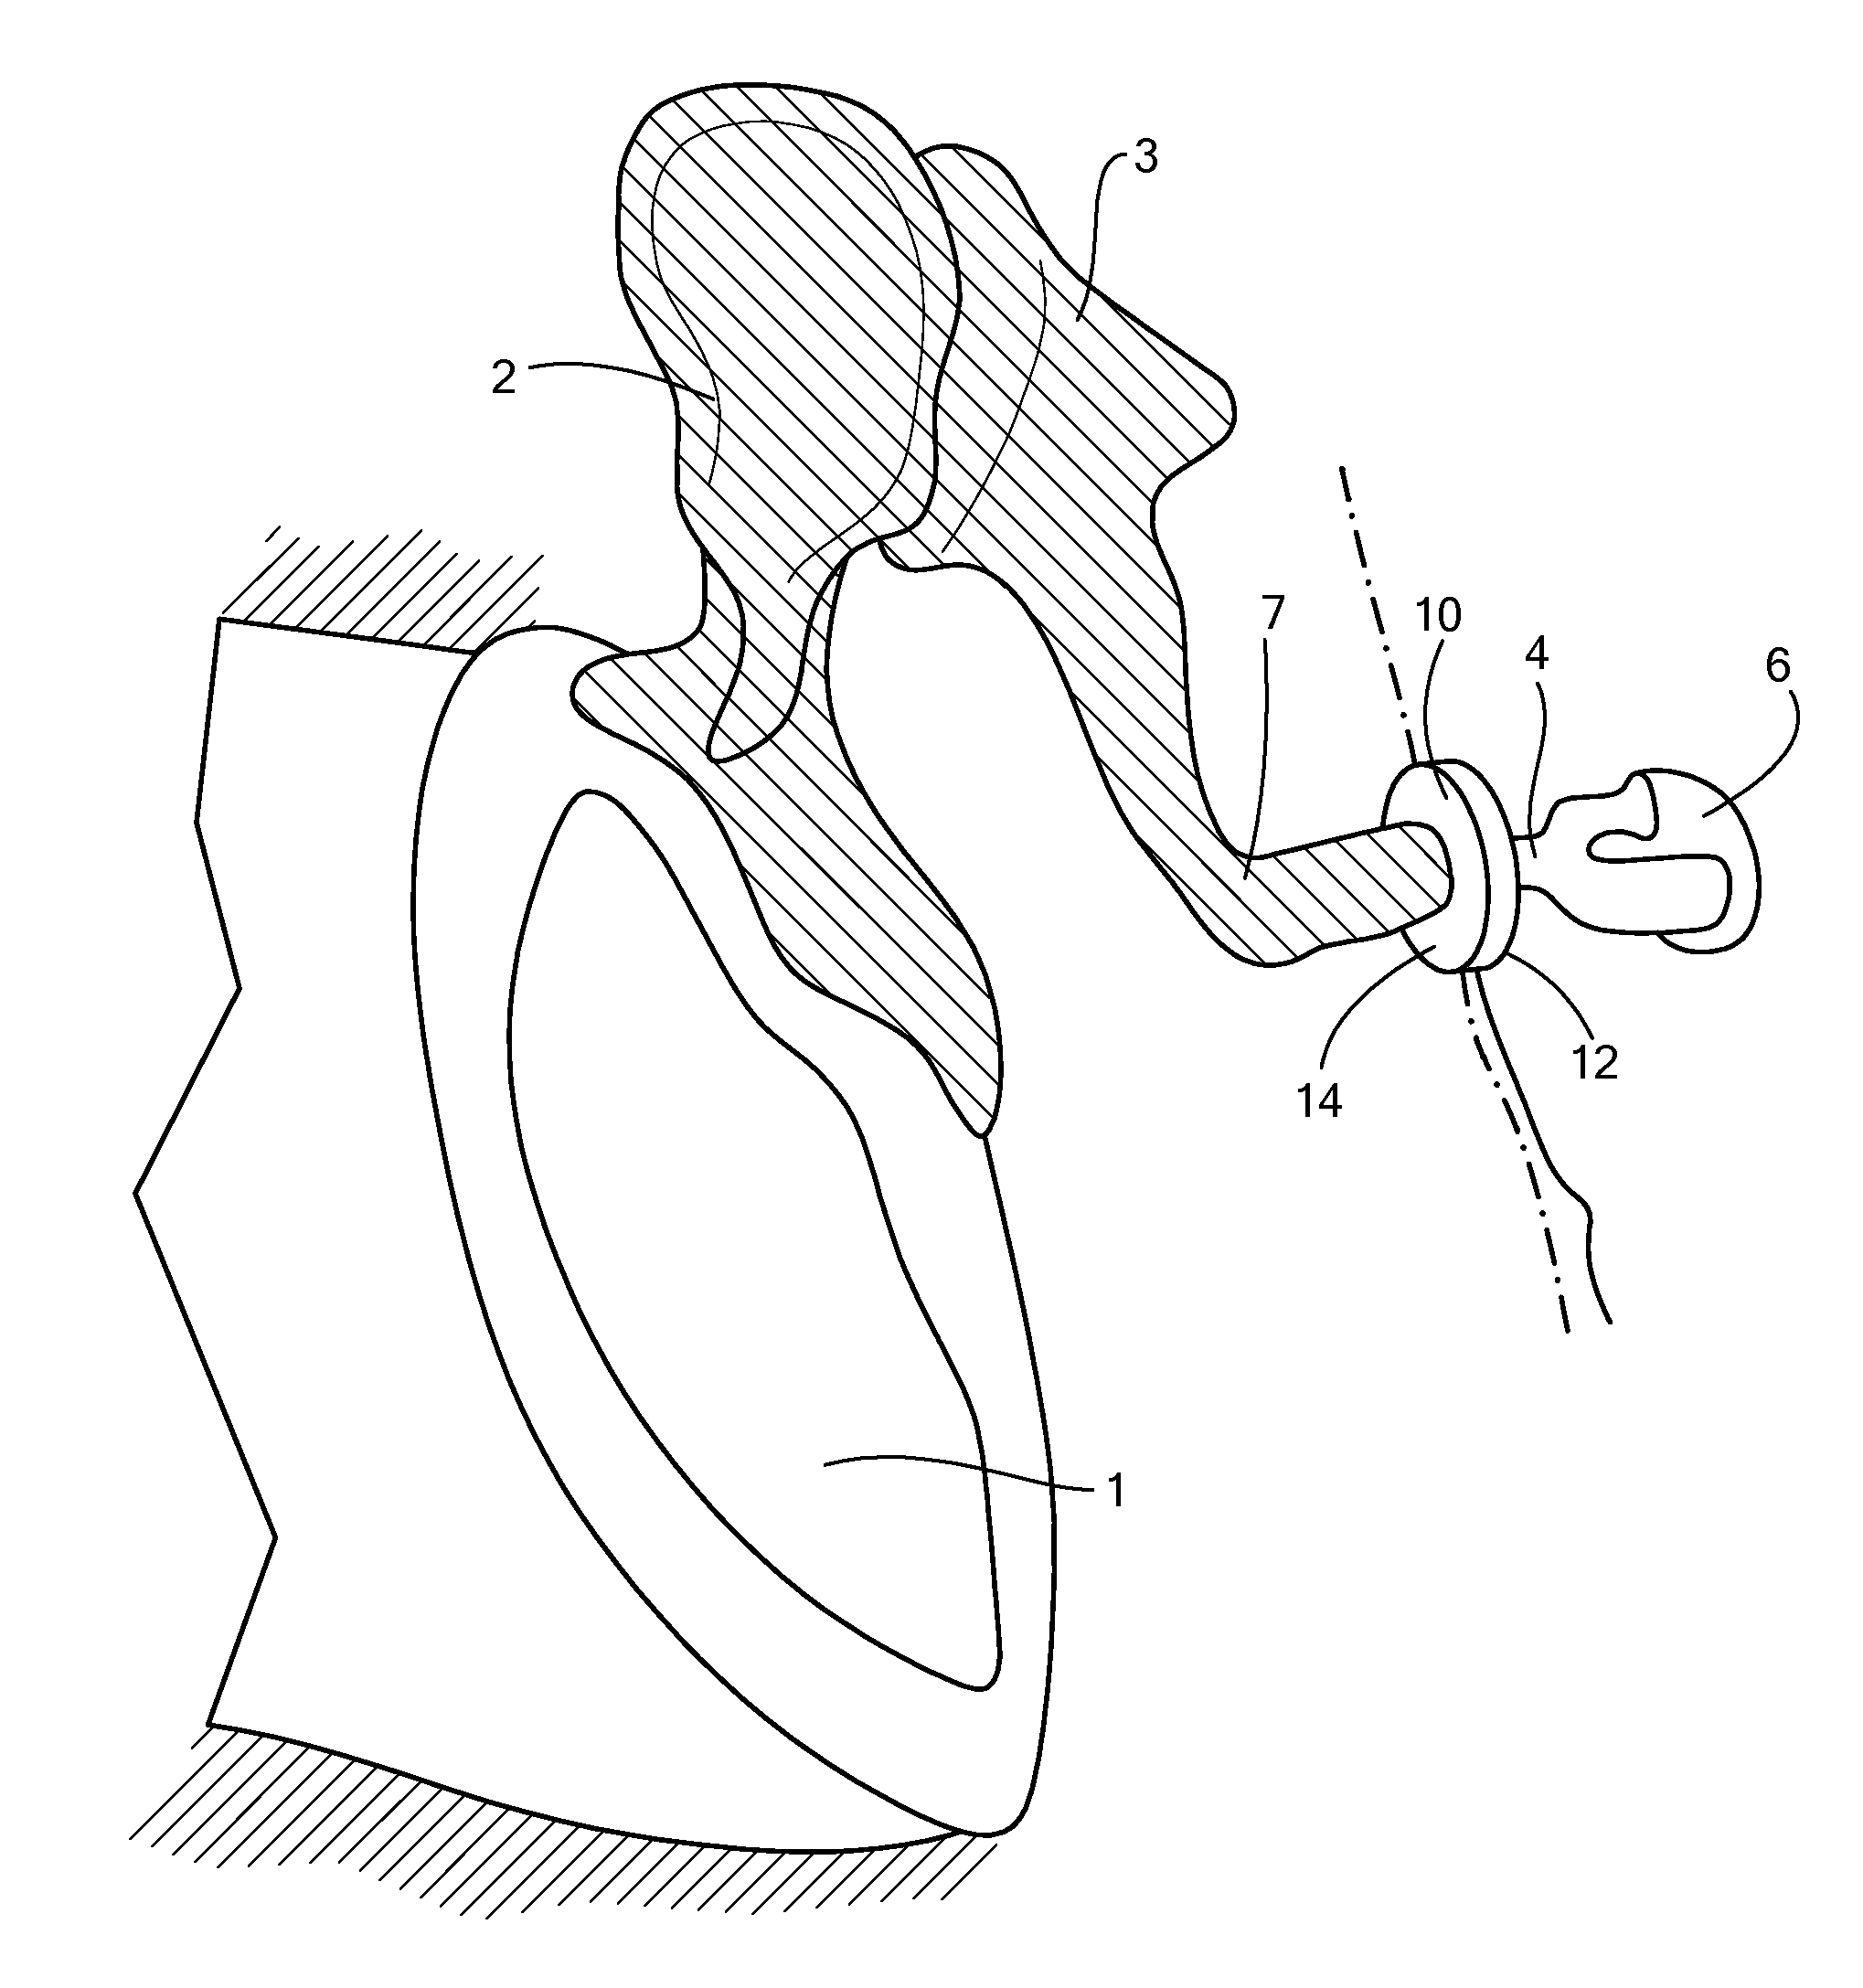 Implantable microphone for hearing systems